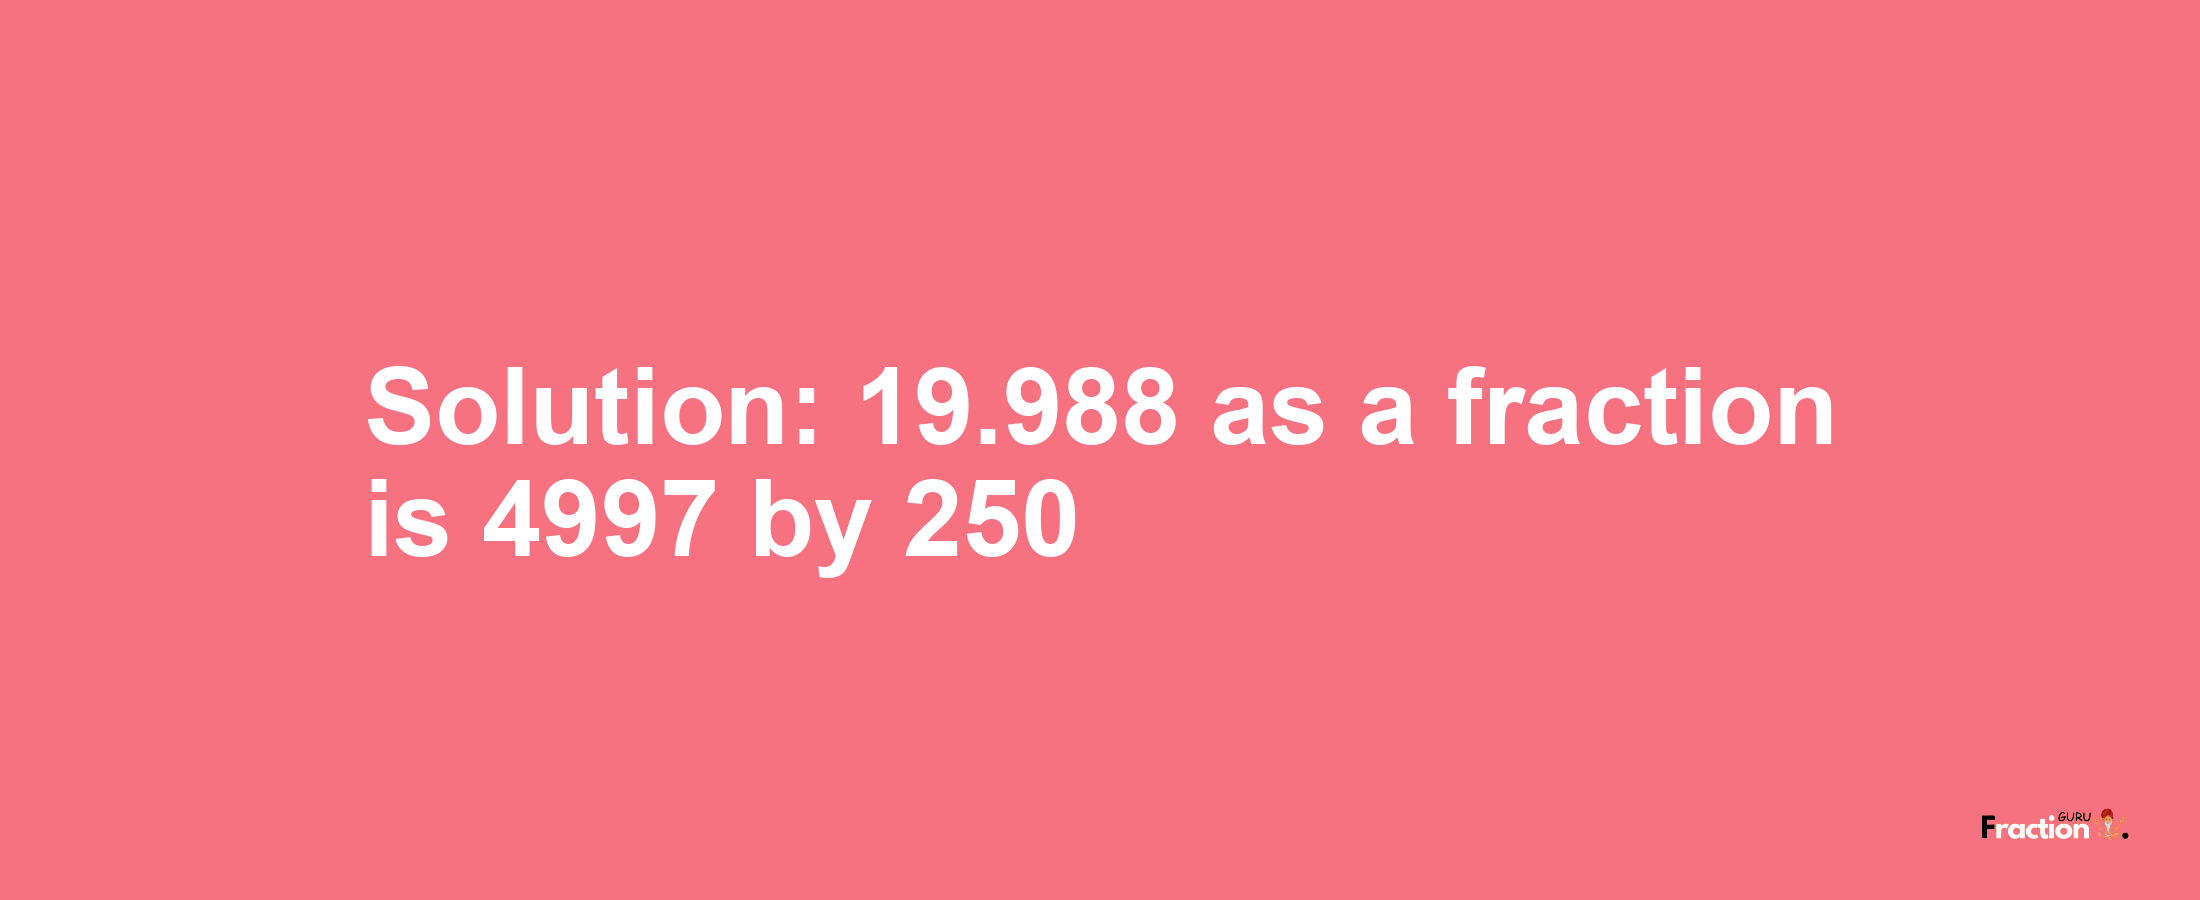 Solution:19.988 as a fraction is 4997/250